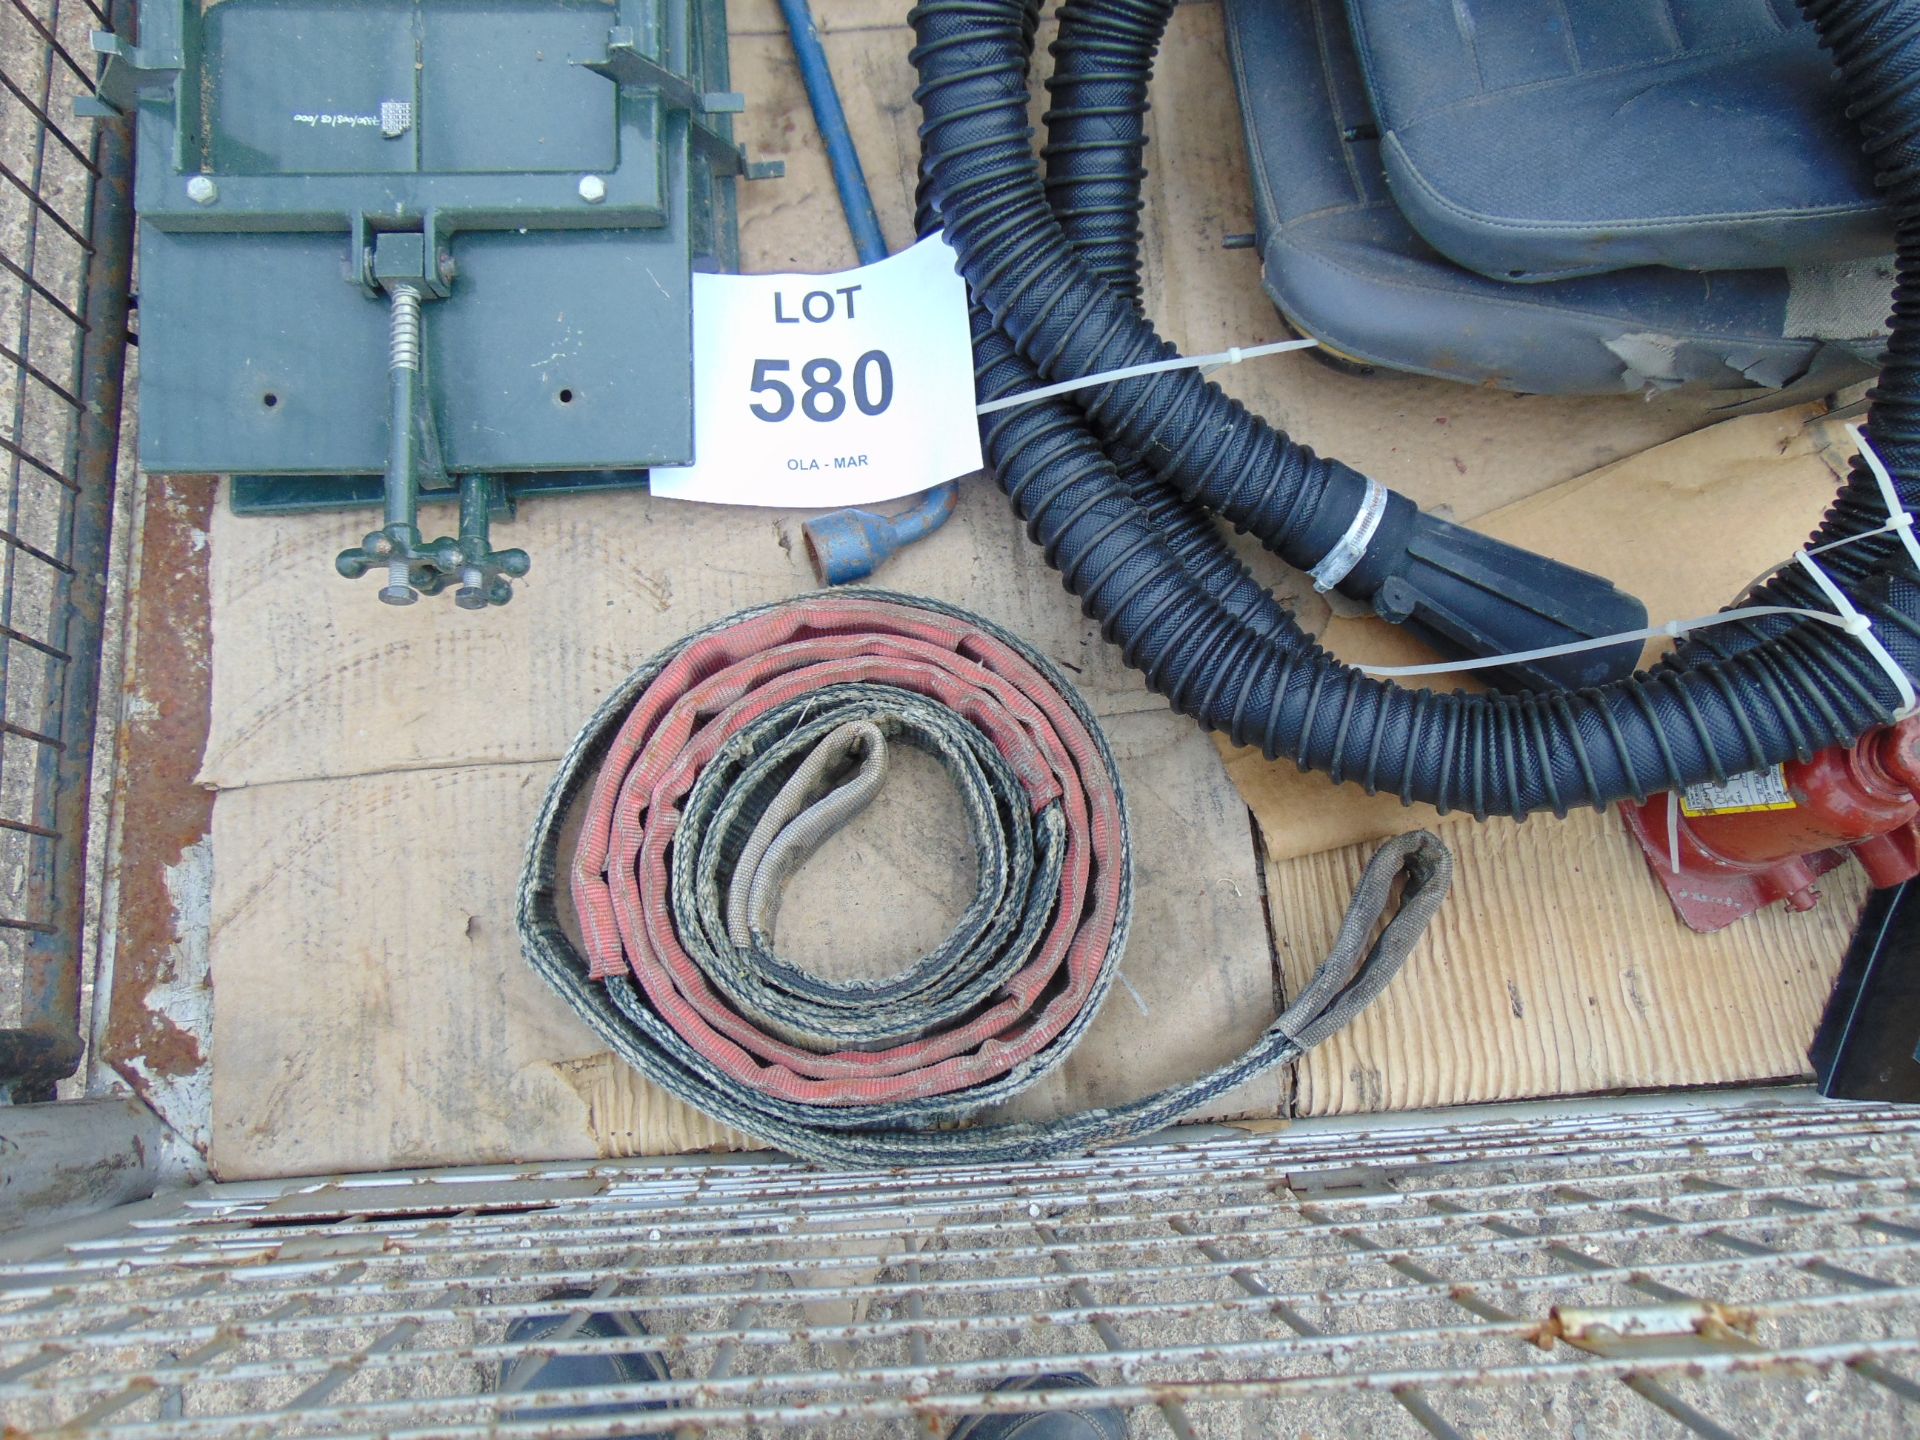 1 x Stillage of Land Rover Equipment in Seat Bases Radio Tray, Tow Ropes etc - Image 2 of 5